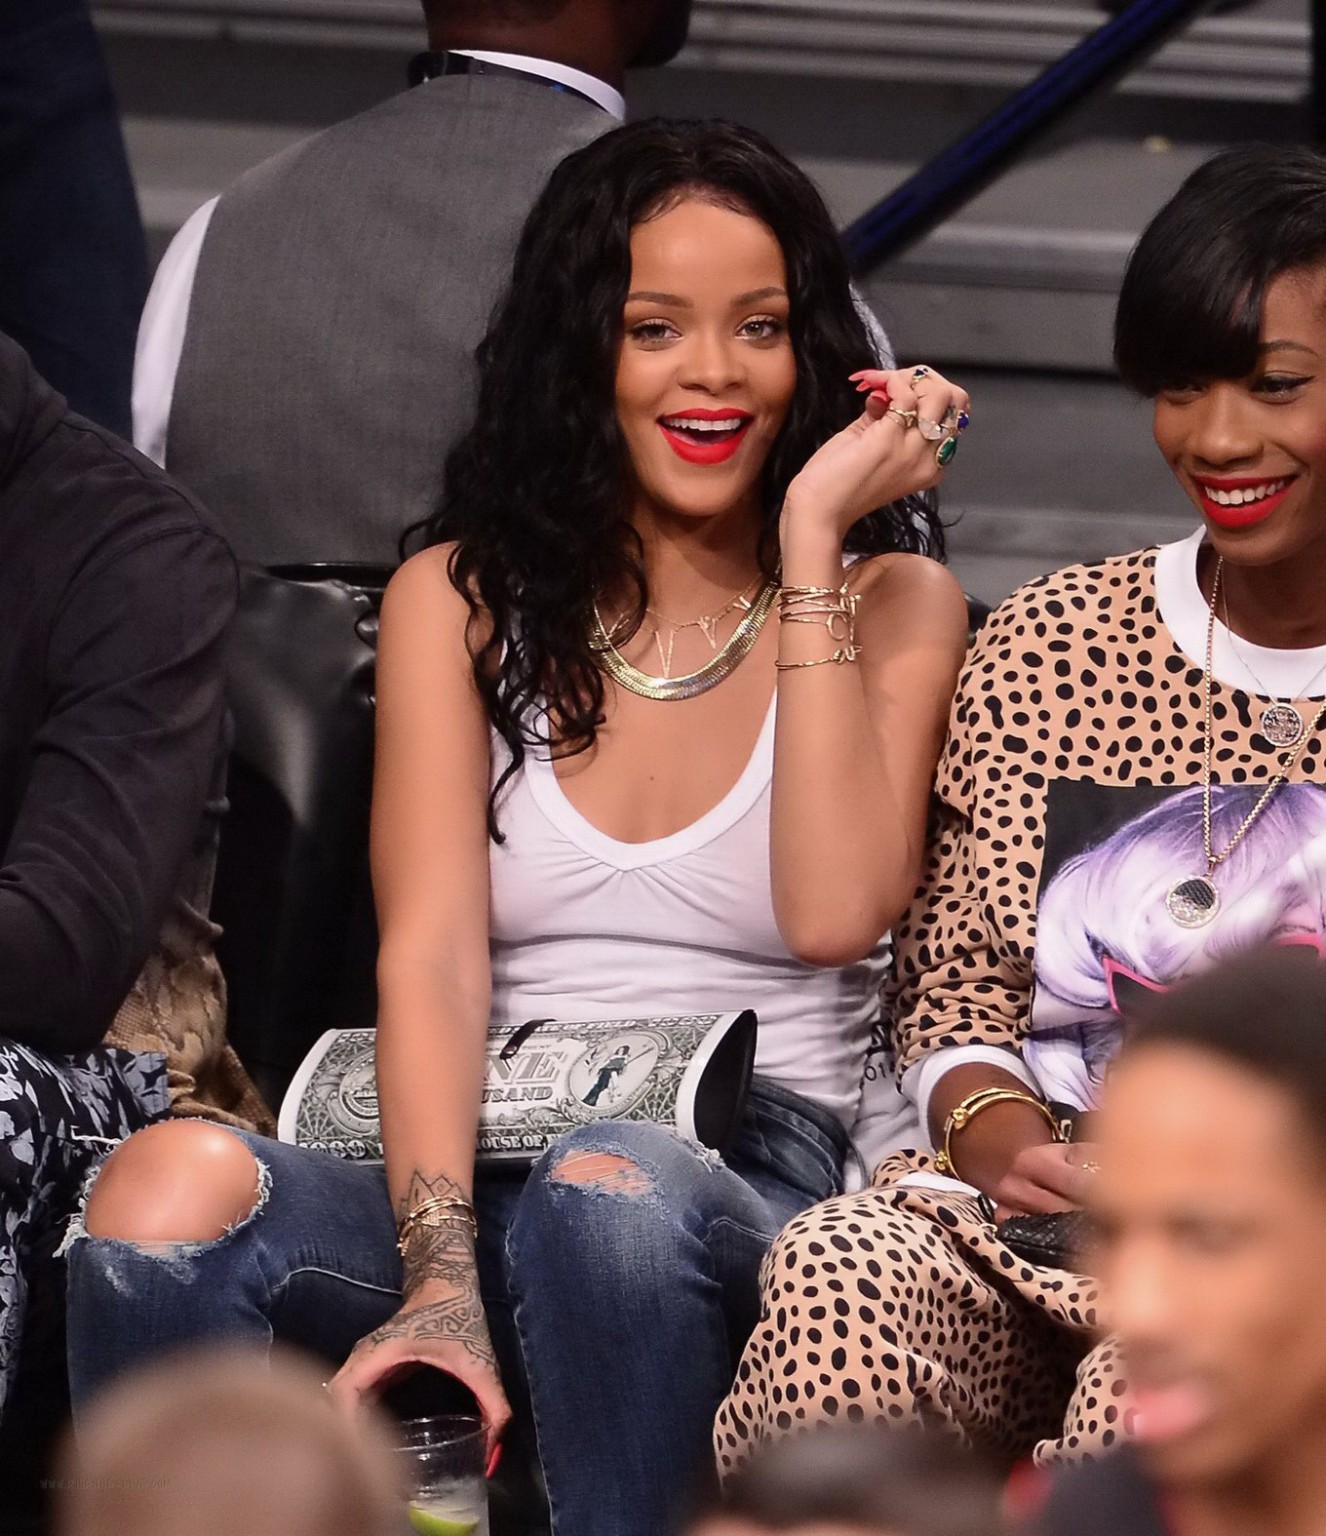 Rihanna shows off her boobs in seethru top at a basketball game in NYC #75198101